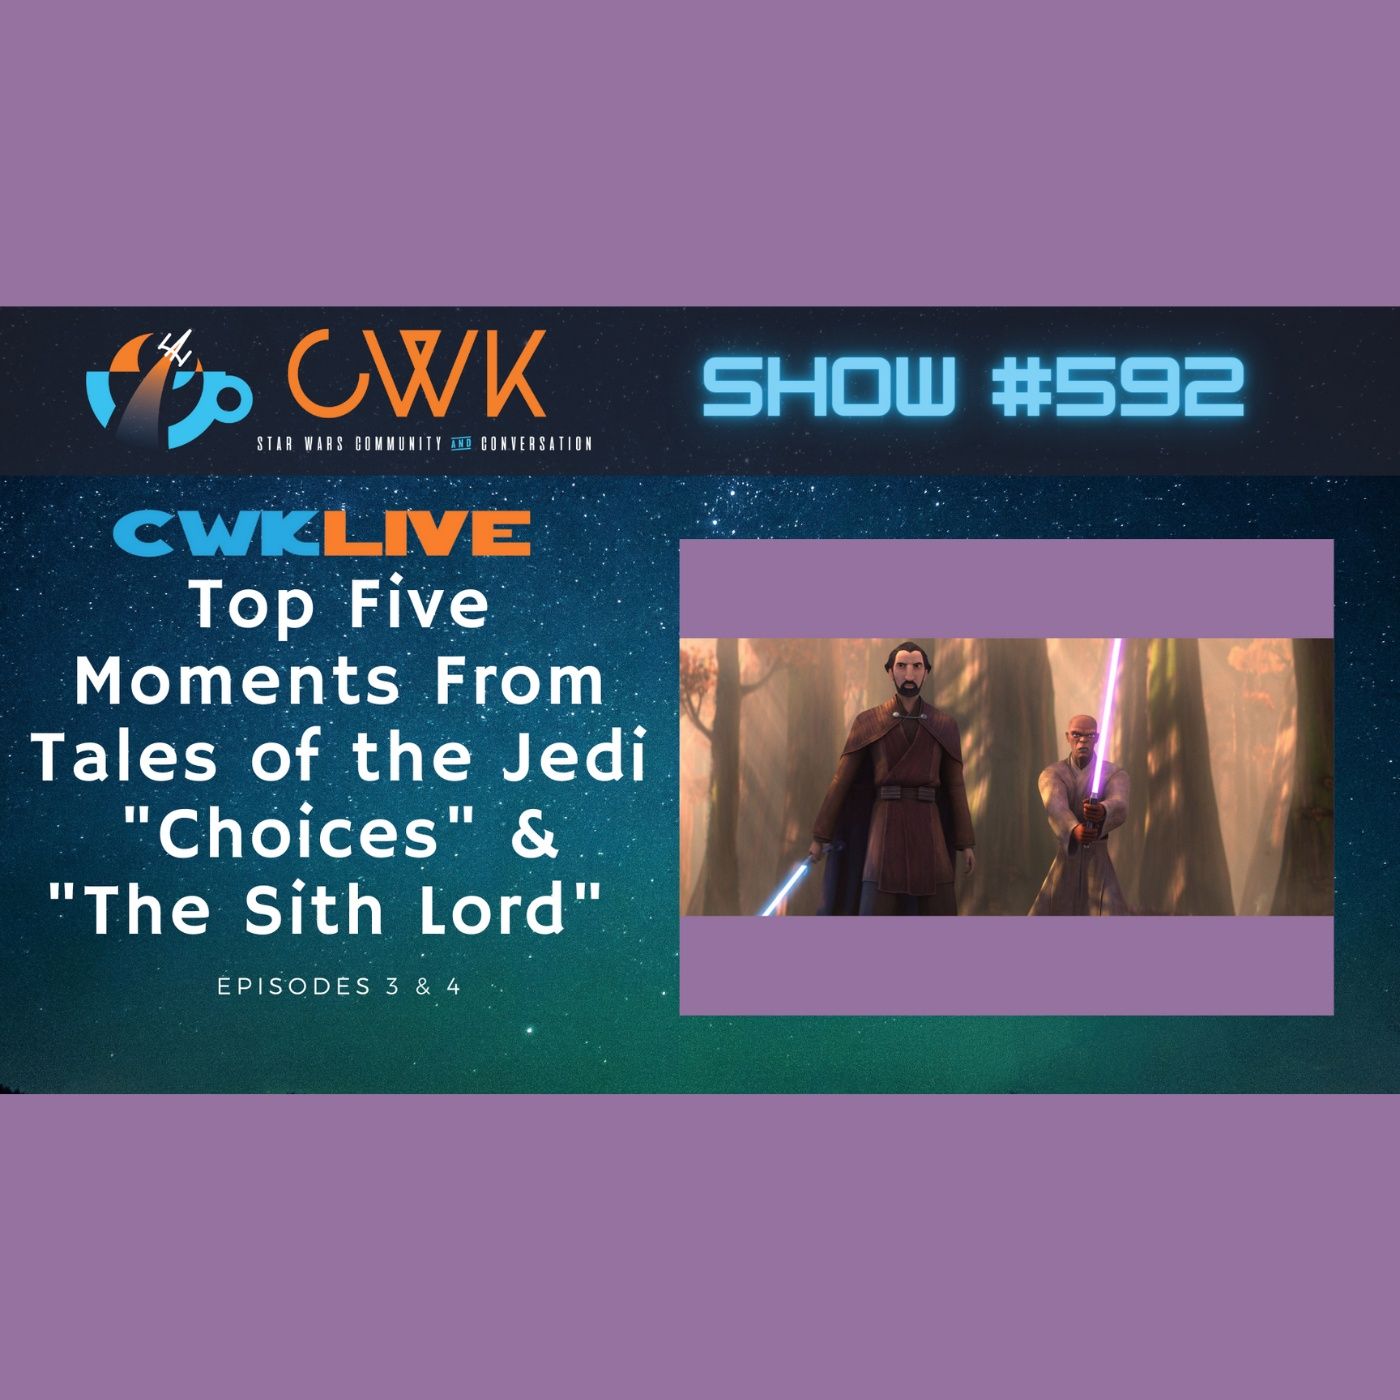 CWK Show #592 LIVE: Top Five Moments From Tales of the Jedi ”Choices” & ”The Sith Lord”